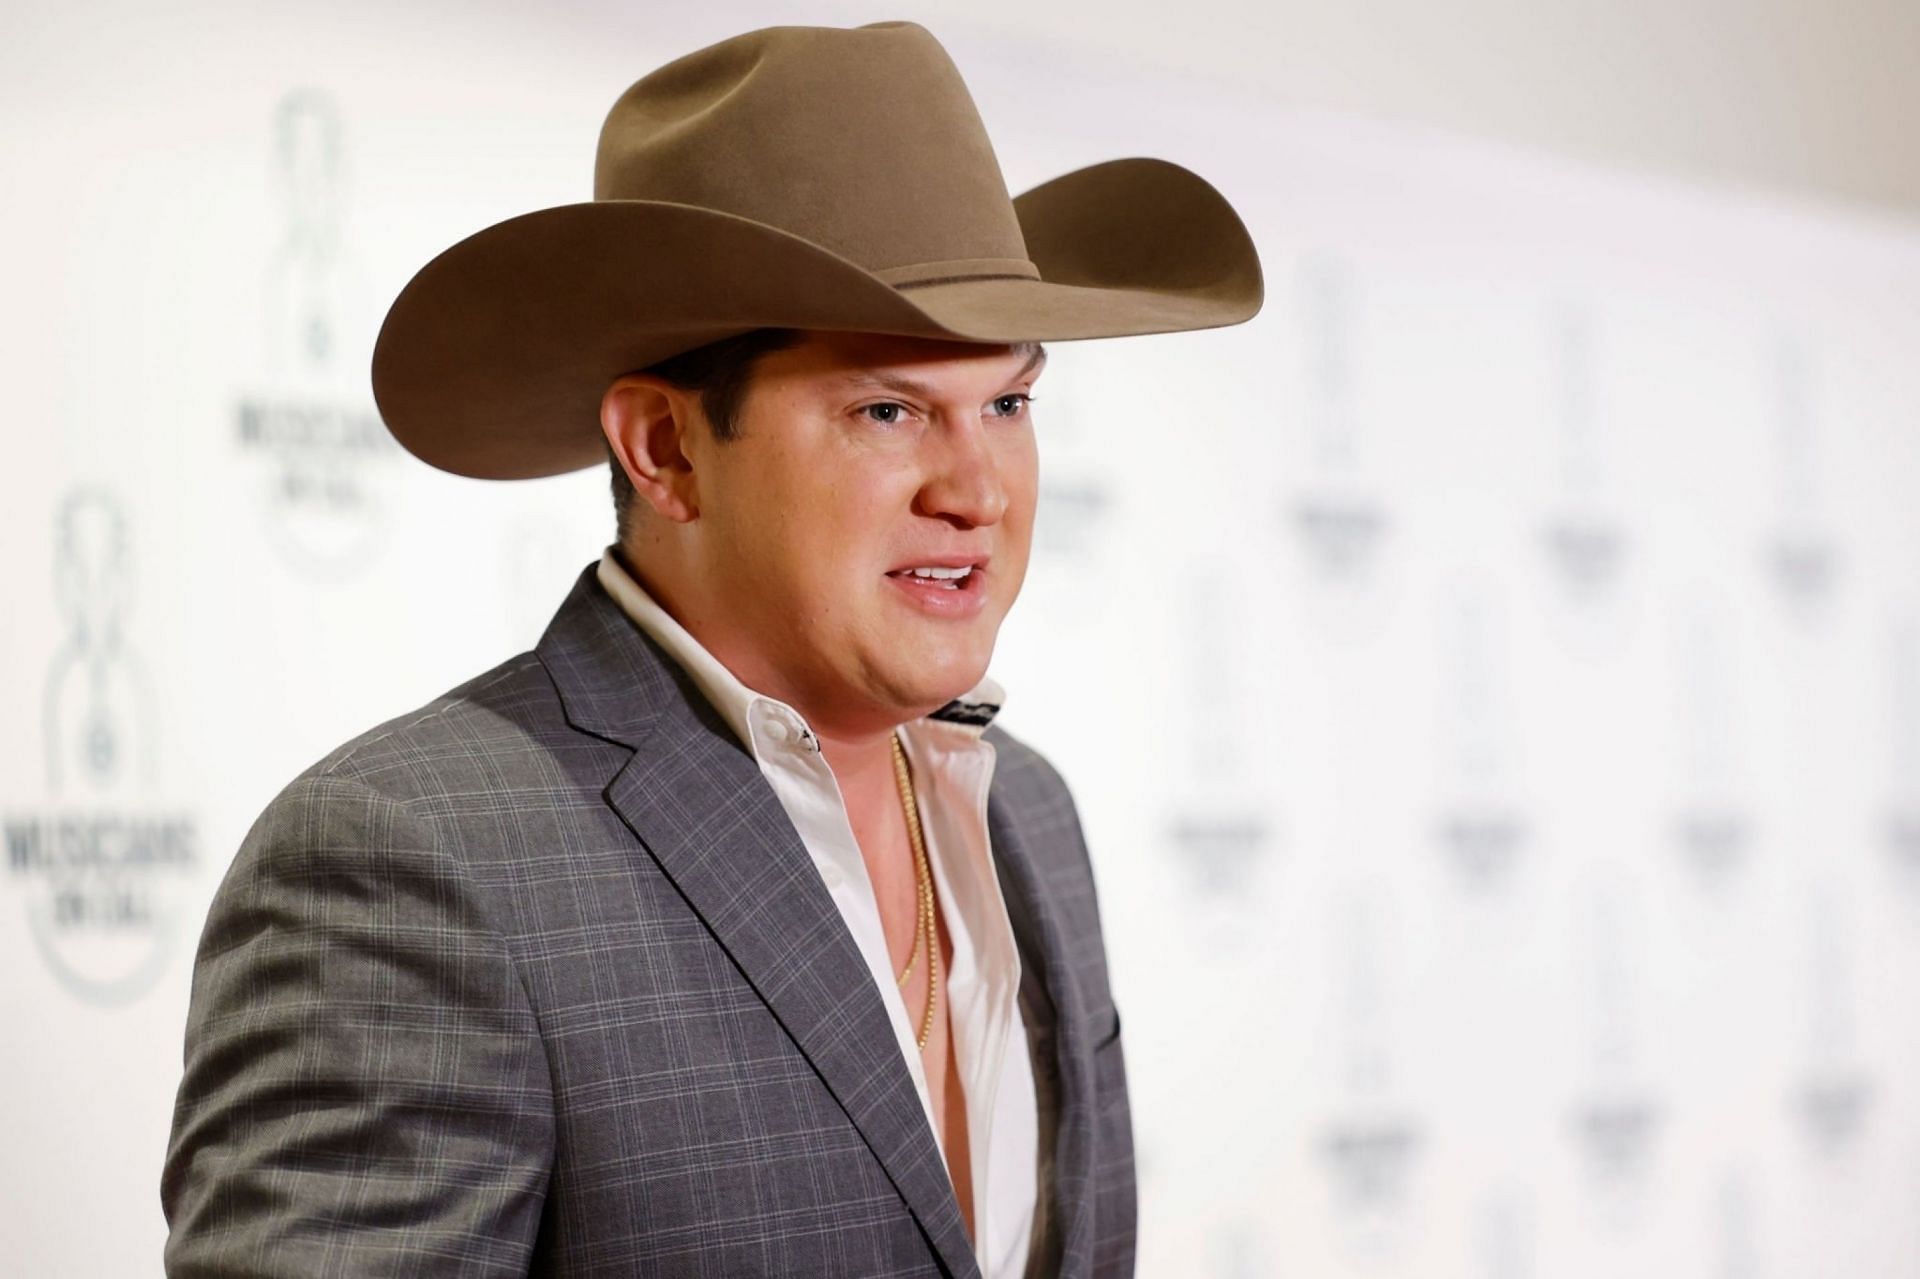 Jon Pardi 2023 Tour Dates, venue, tickets, where to buy and more